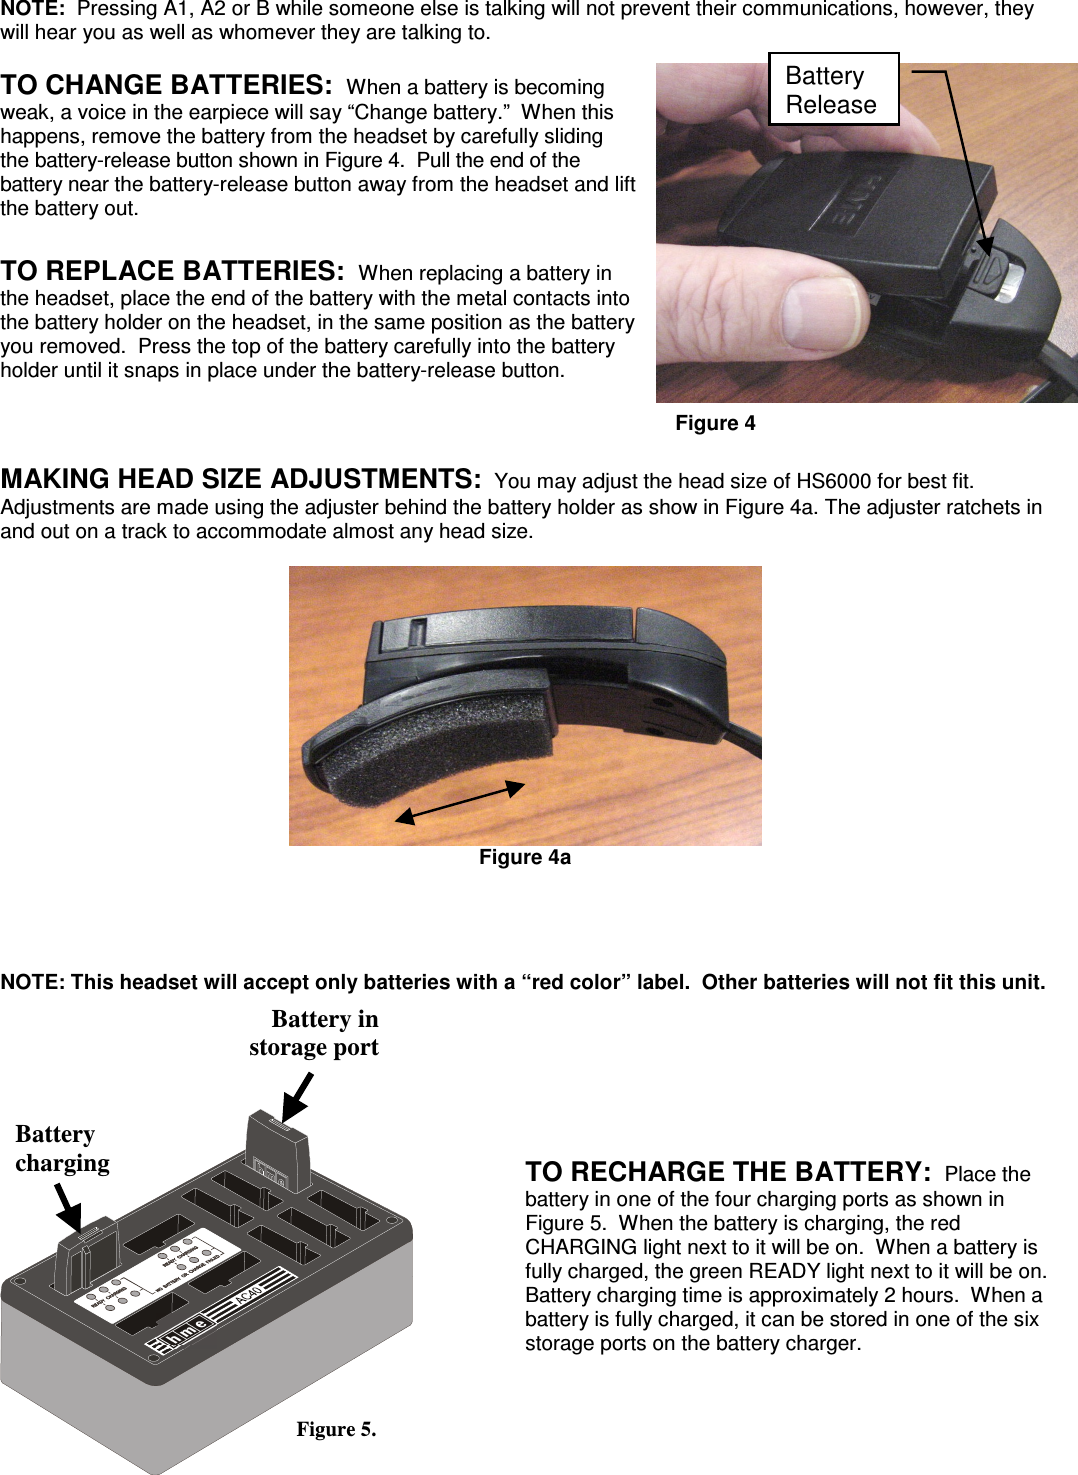 NOTE:  Pressing A1, A2 or B while someone else is talking will not prevent their communications, however, they will hear you as well as whomever they are talking to. TO CHANGE BATTERIES:  When a battery is becoming weak, a voice in the earpiece will say “Change battery.”  When this happens, remove the battery from the headset by carefully sliding the battery-release button shown in Figure 4.  Pull the end of the battery near the battery-release button away from the headset and lift the battery out.  TO REPLACE BATTERIES:  When replacing a battery in the headset, place the end of the battery with the metal contacts into the battery holder on the headset, in the same position as the battery you removed.  Press the top of the battery carefully into the battery holder until it snaps in place under the battery-release button.    Figure 4  MAKING HEAD SIZE ADJUSTMENTS:  You may adjust the head size of HS6000 for best fit.  Adjustments are made using the adjuster behind the battery holder as show in Figure 4a. The adjuster ratchets in and out on a track to accommodate almost any head size.   Figure 4a     NOTE: This headset will accept only batteries with a “red color” label.  Other batteries will not fit this unit.     TO RECHARGE THE BATTERY:  Place the battery in one of the four charging ports as shown in Figure 5.  When the battery is charging, the red CHARGING light next to it will be on.  When a battery is fully charged, the green READY light next to it will be on.  Battery charging time is approximately 2 hours.  When a battery is fully charged, it can be stored in one of the six storage ports on the battery charger.     Battery in  storage port  Battery charging Figure 5. Battery Release 